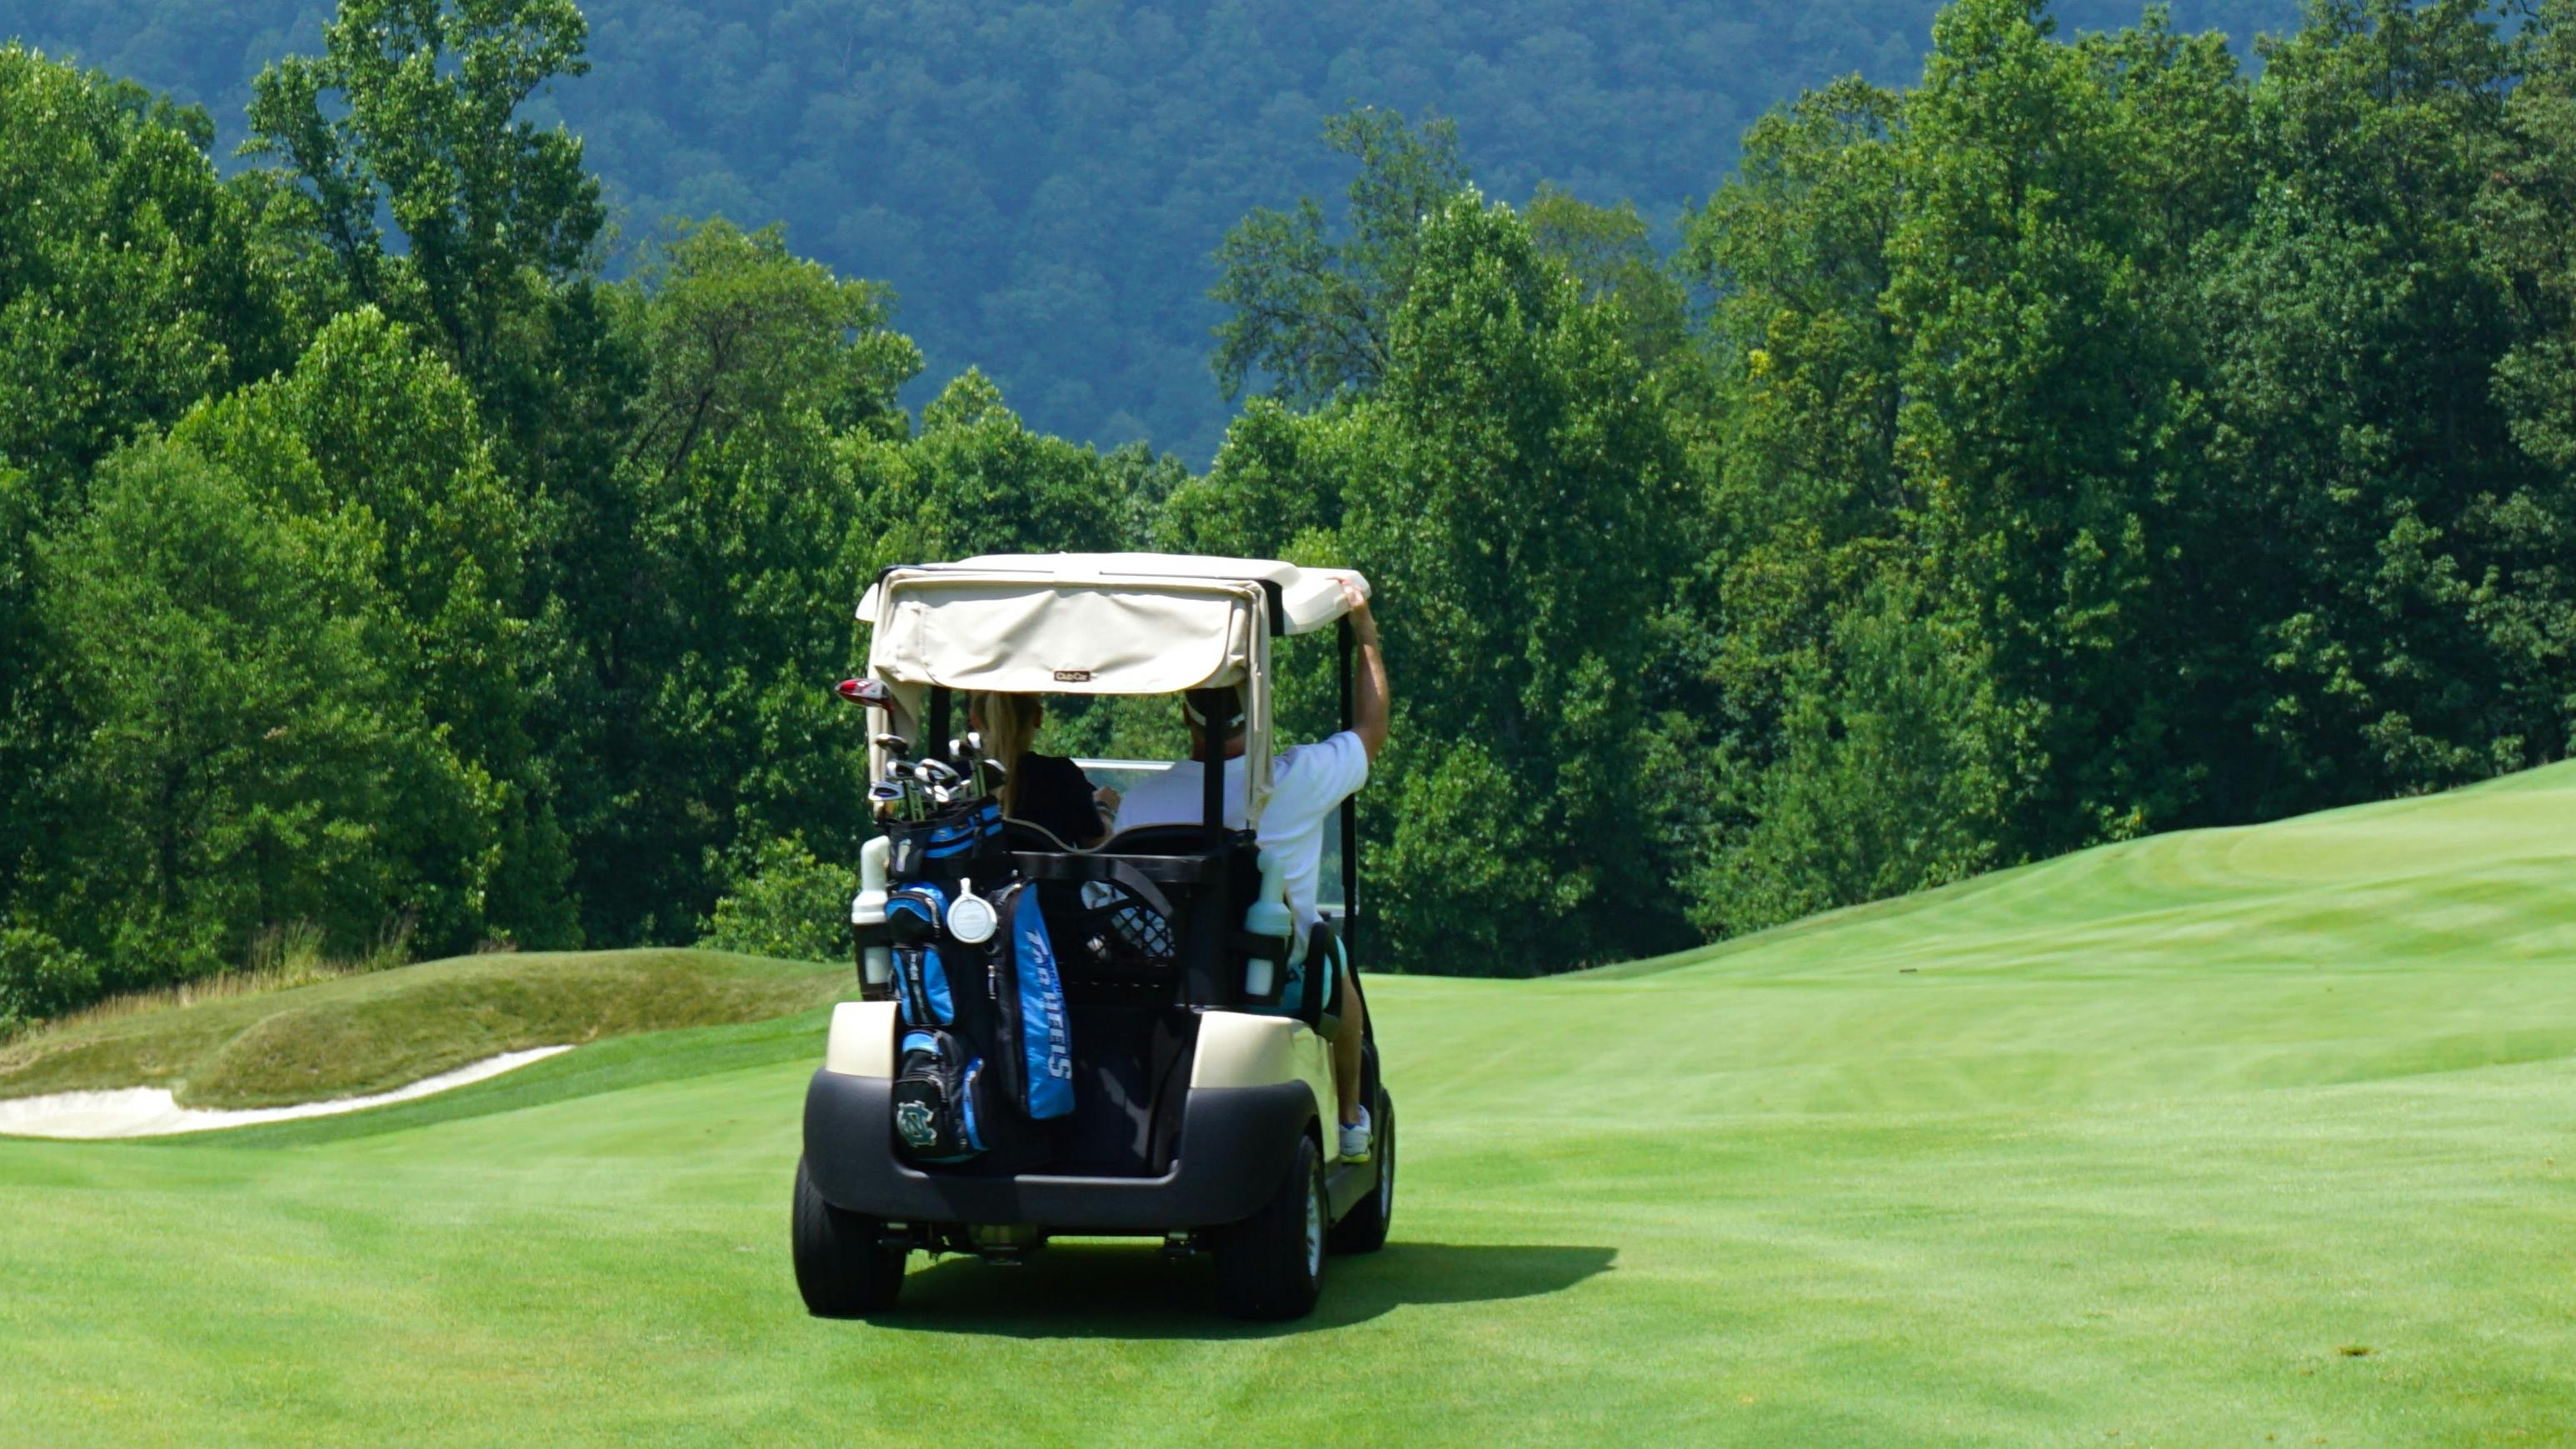 Two people drive away on a golf cart towards a tree-lined golf course